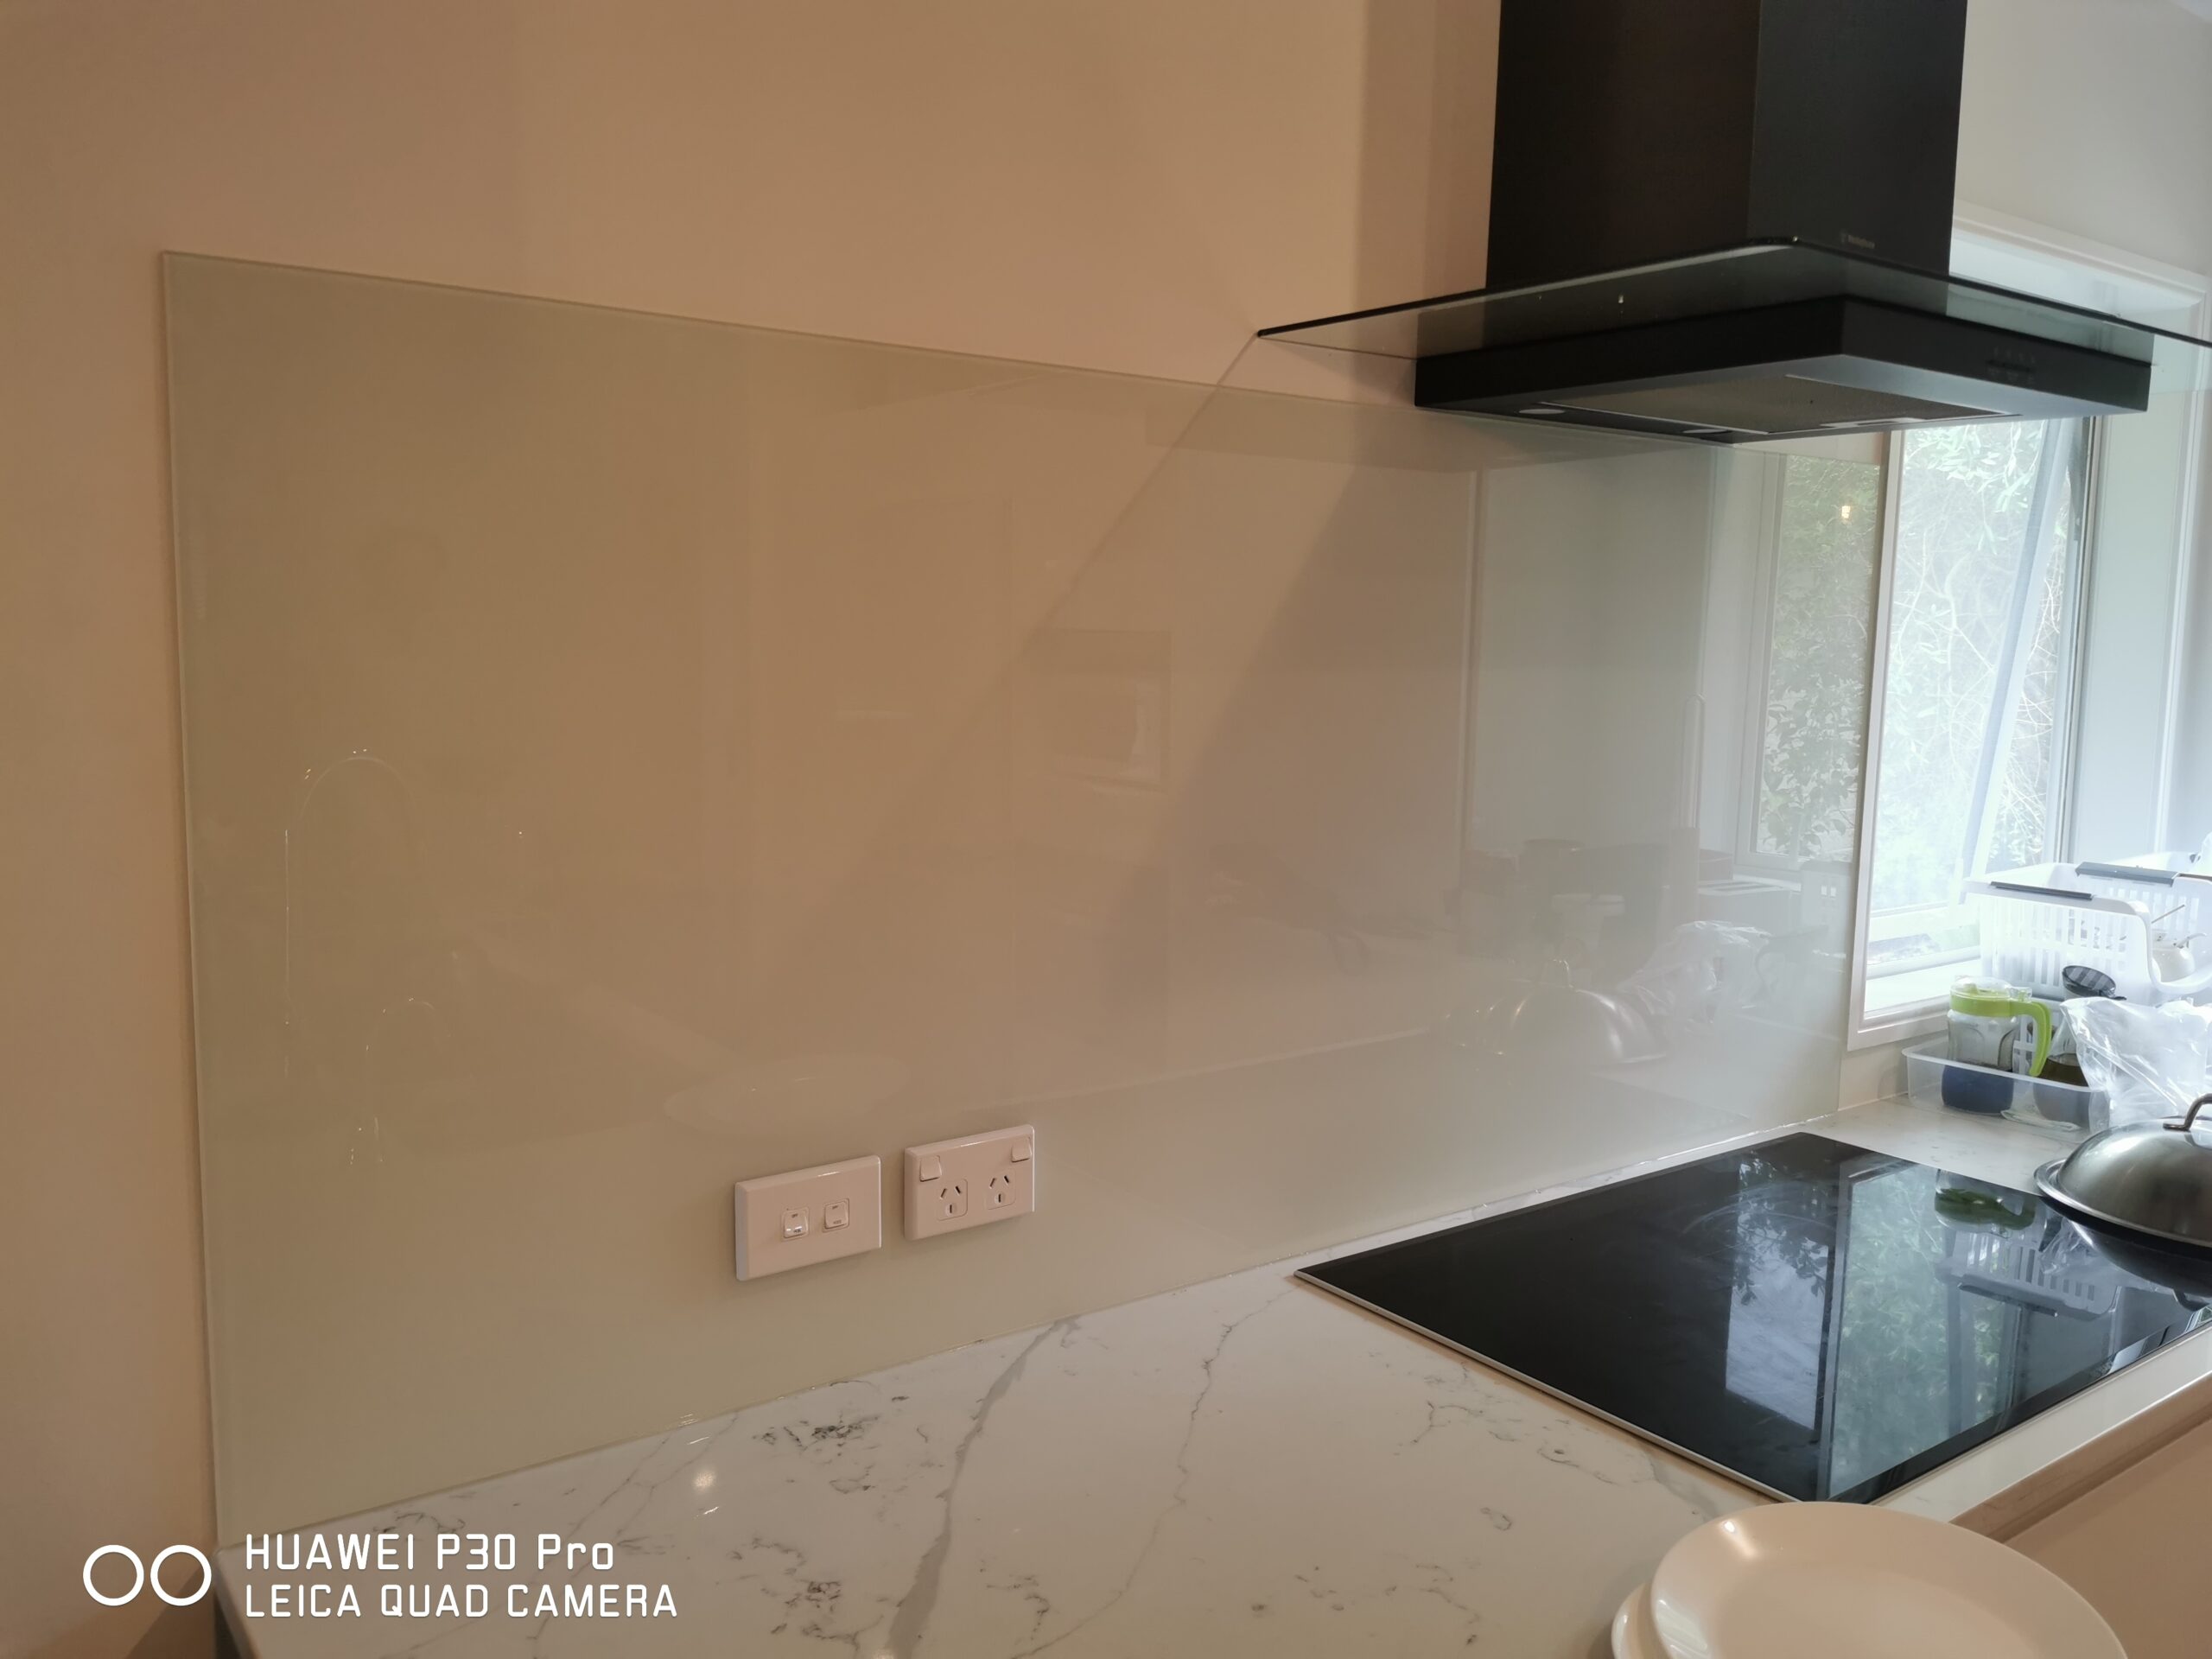 how to select a color for my splashback